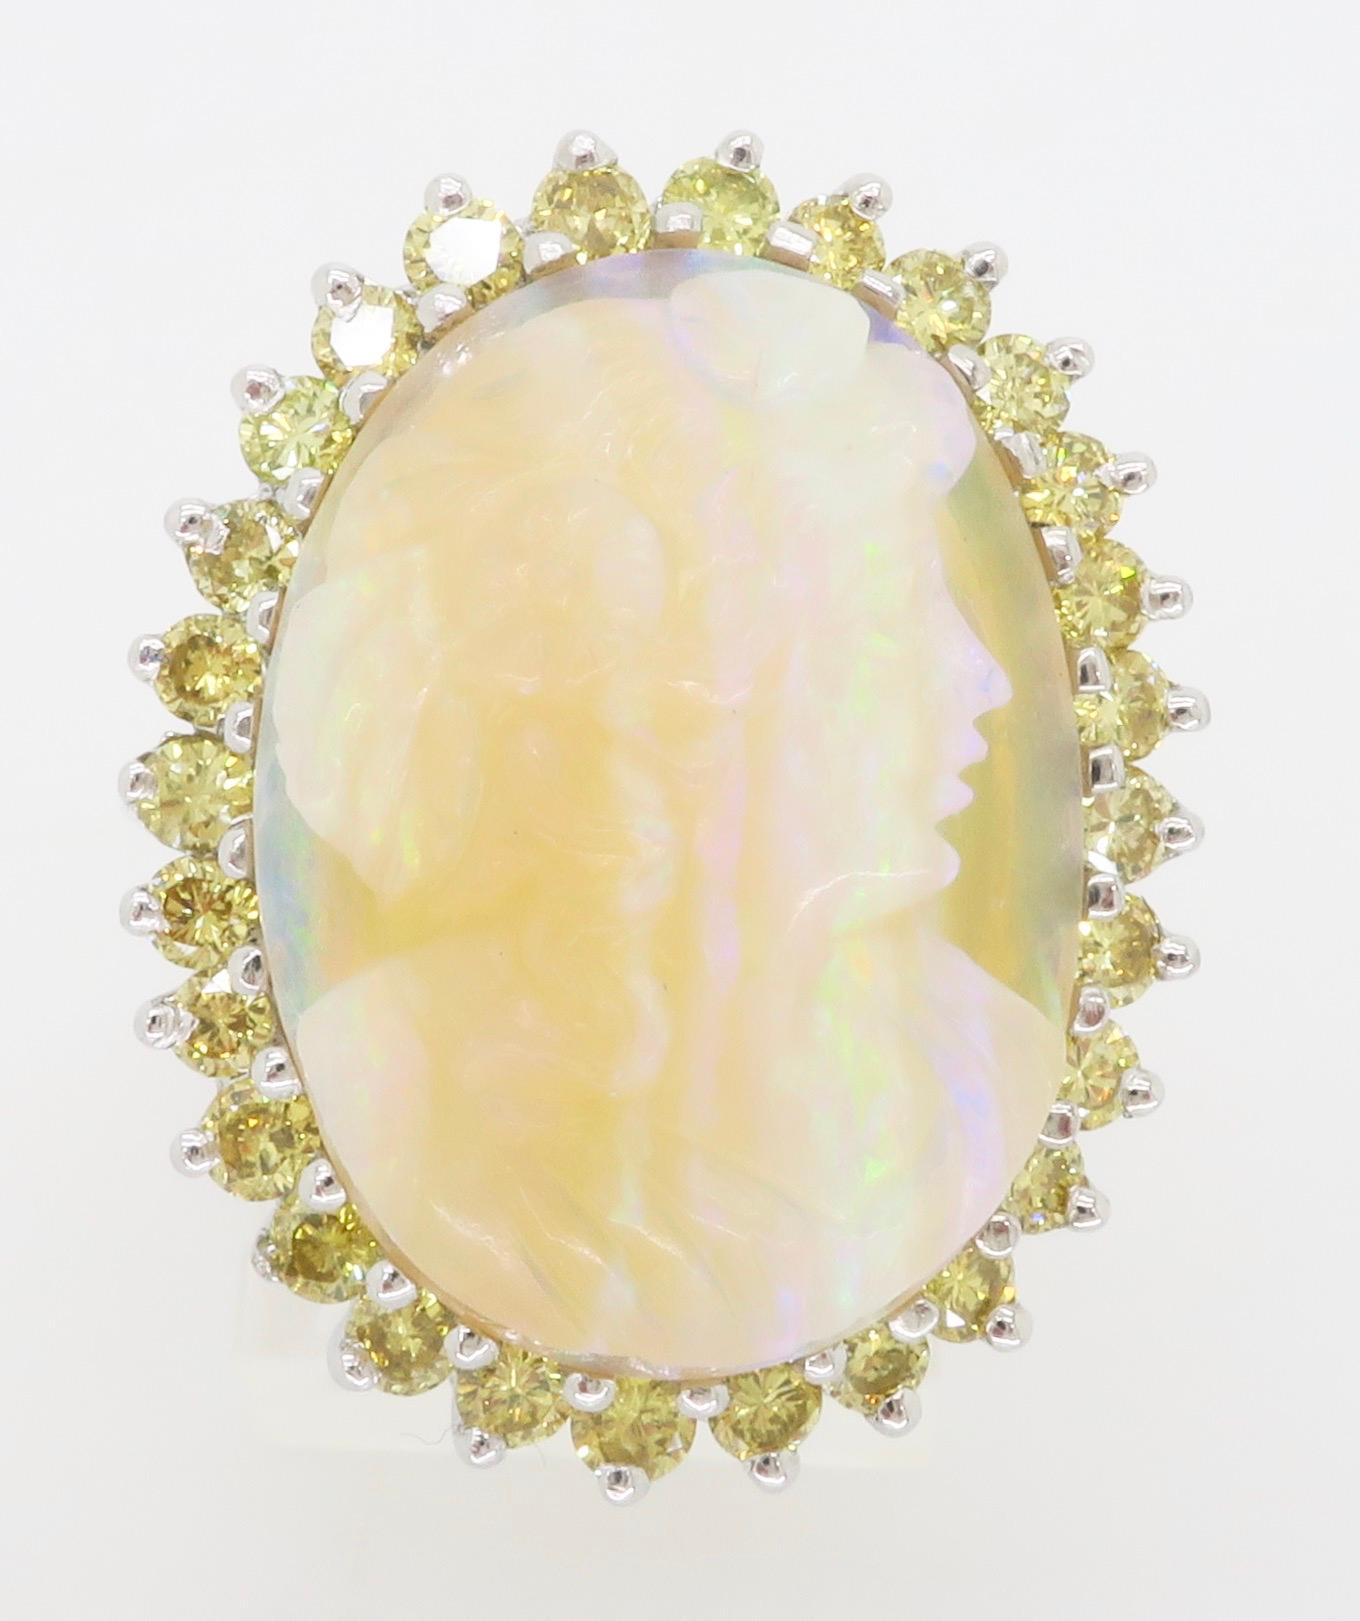 Stunning carved Opal set in a 14k yellow gold ring surrounded by 1.70CTW of Yellow Diamonds. 

Gemstone: Opal & Diamond
Diamond Carat Weight:  1.70CTW
Diamond Cut: Round Brilliant Cut
Average Color: Yellow
Average Clarity: VS-SI
Metal: 14k White